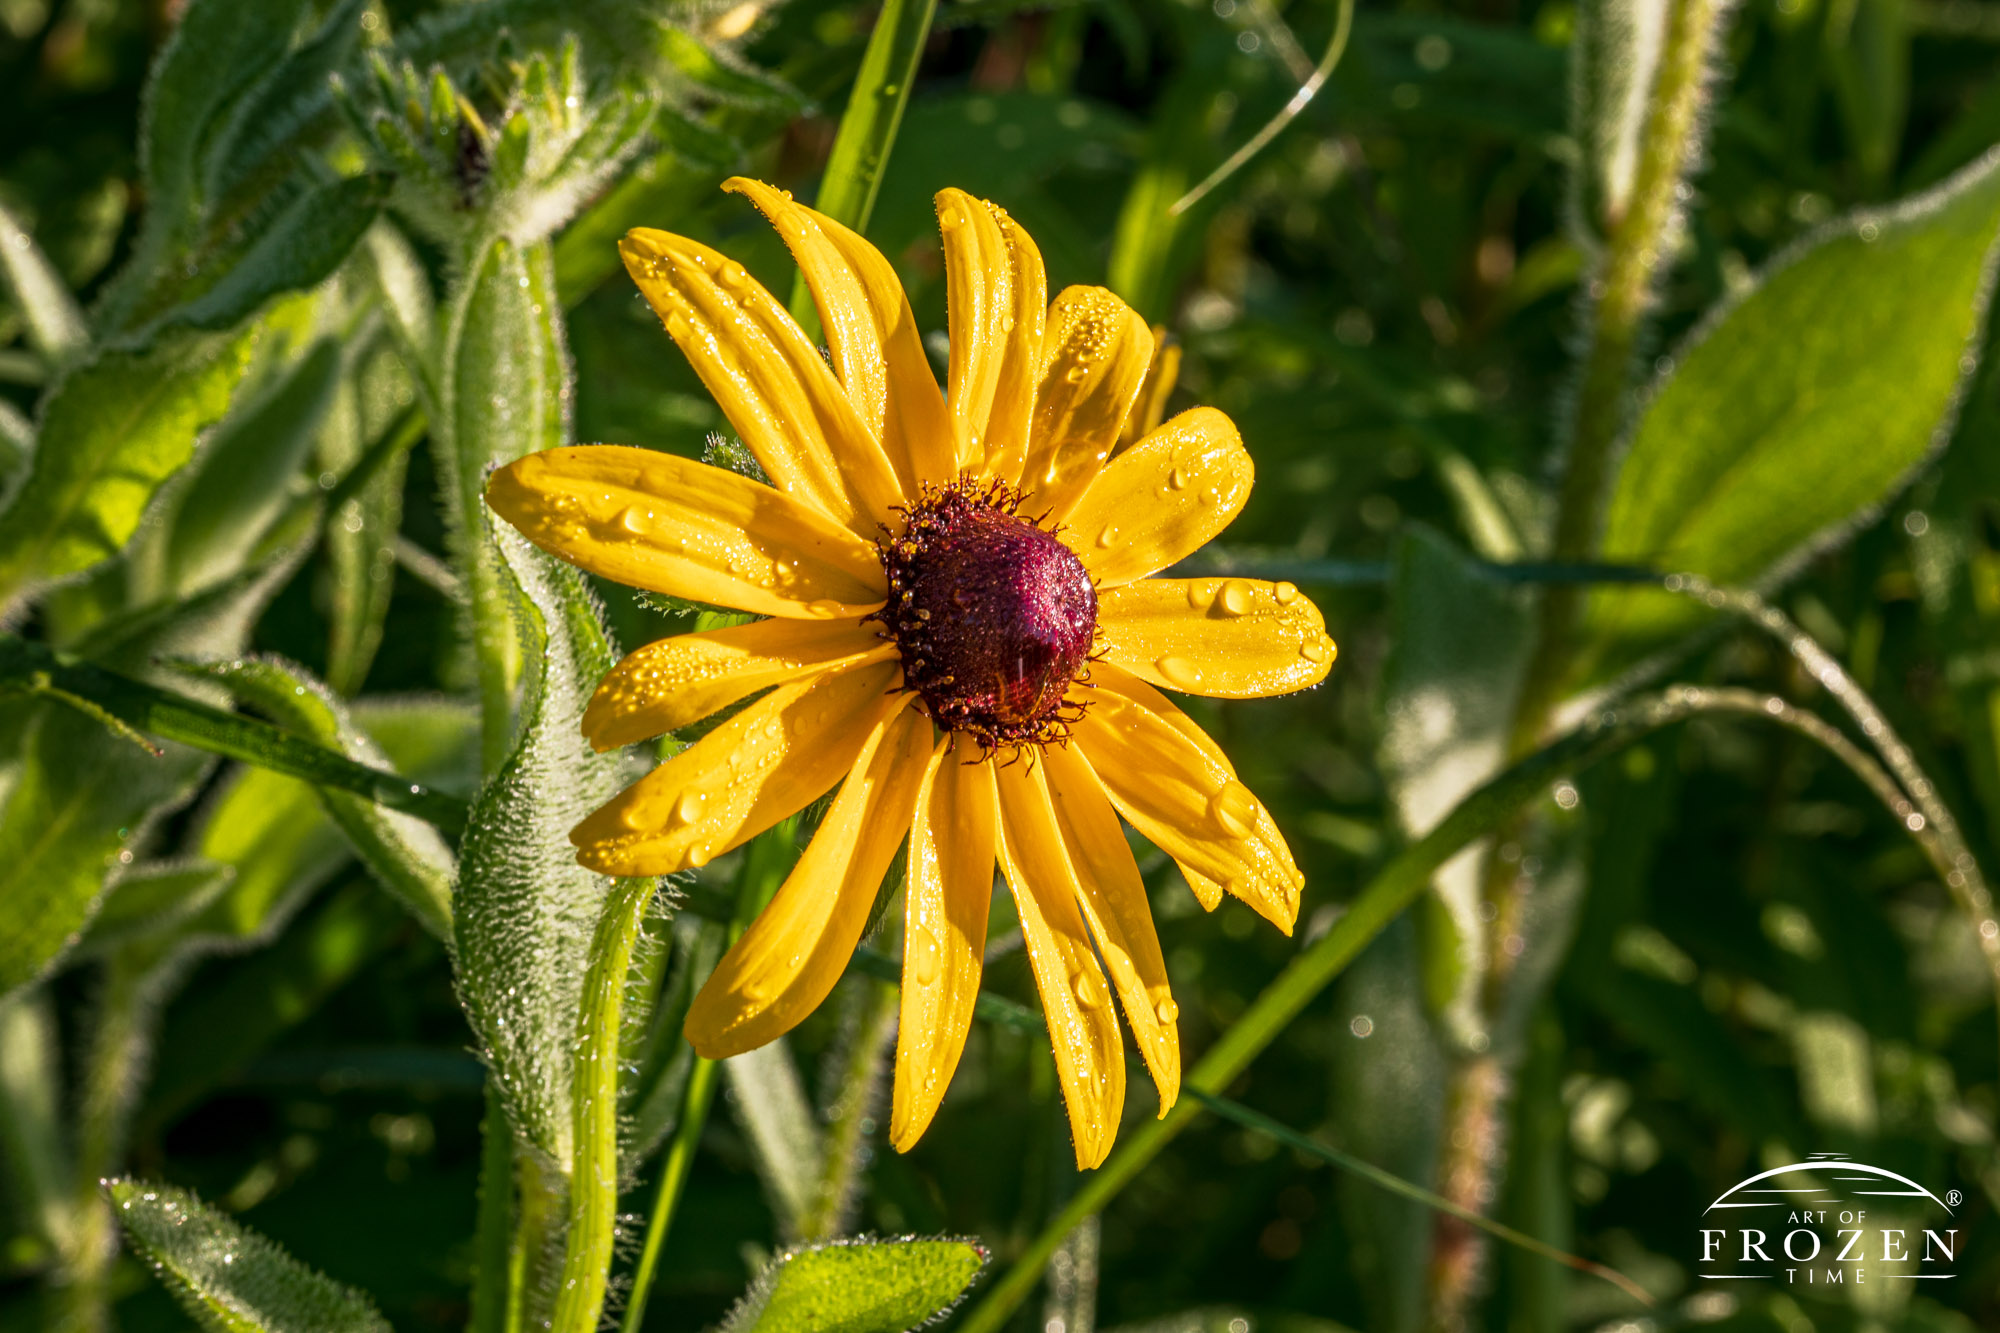 A close up of a Black-eyed Susan drenched in morning dew as the bright sun illuminates it petals